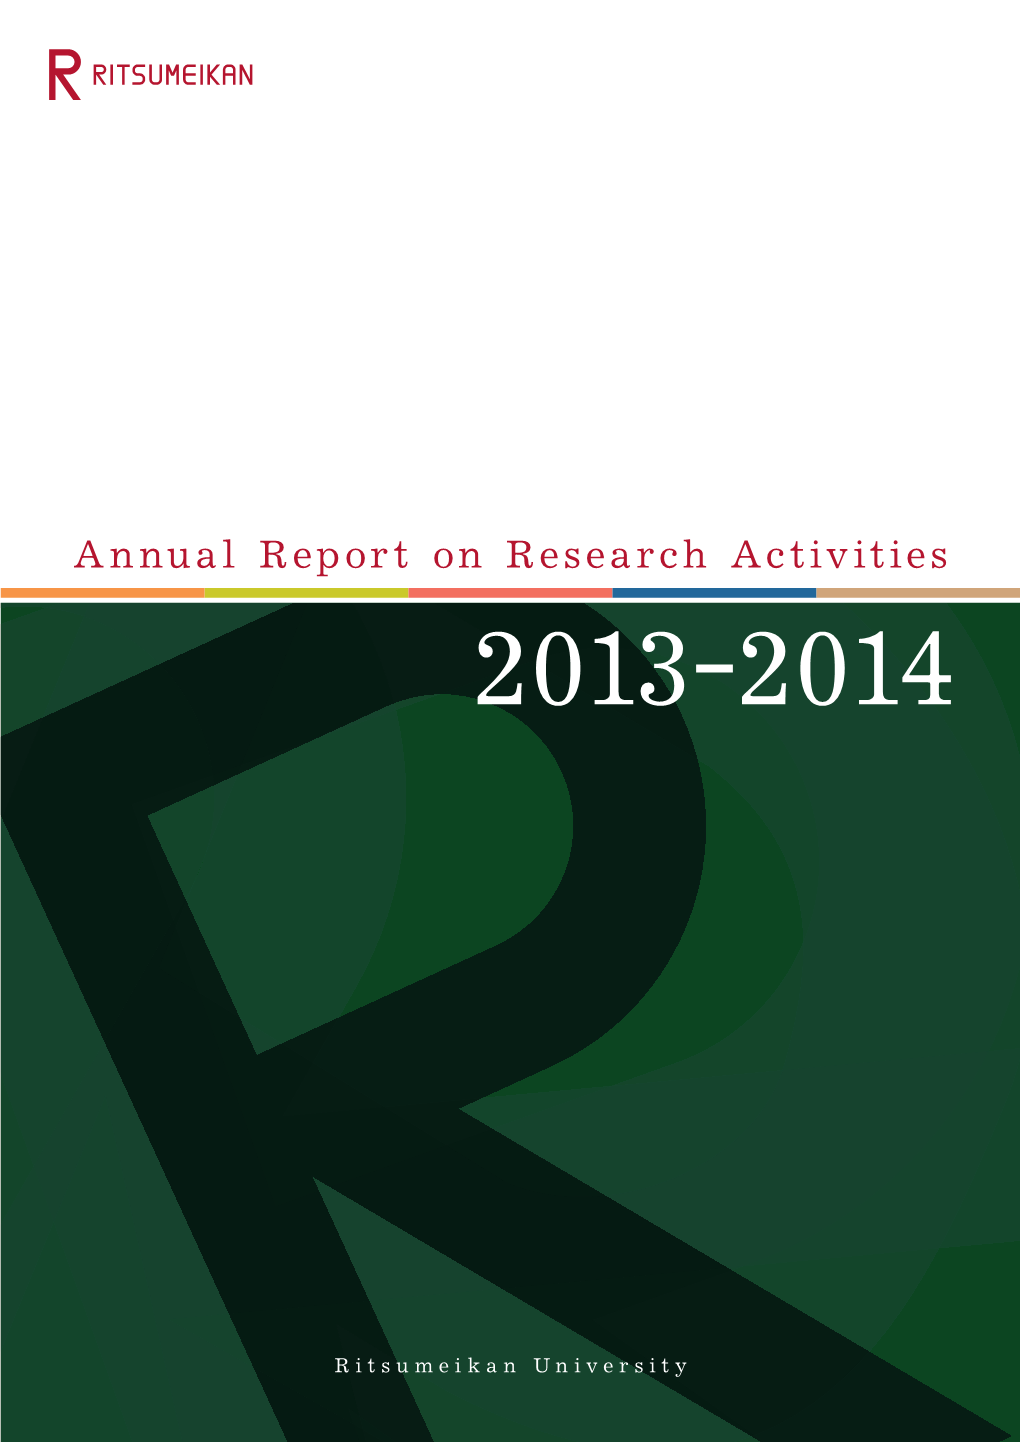 Annual Report on Research Activities 2013-2014